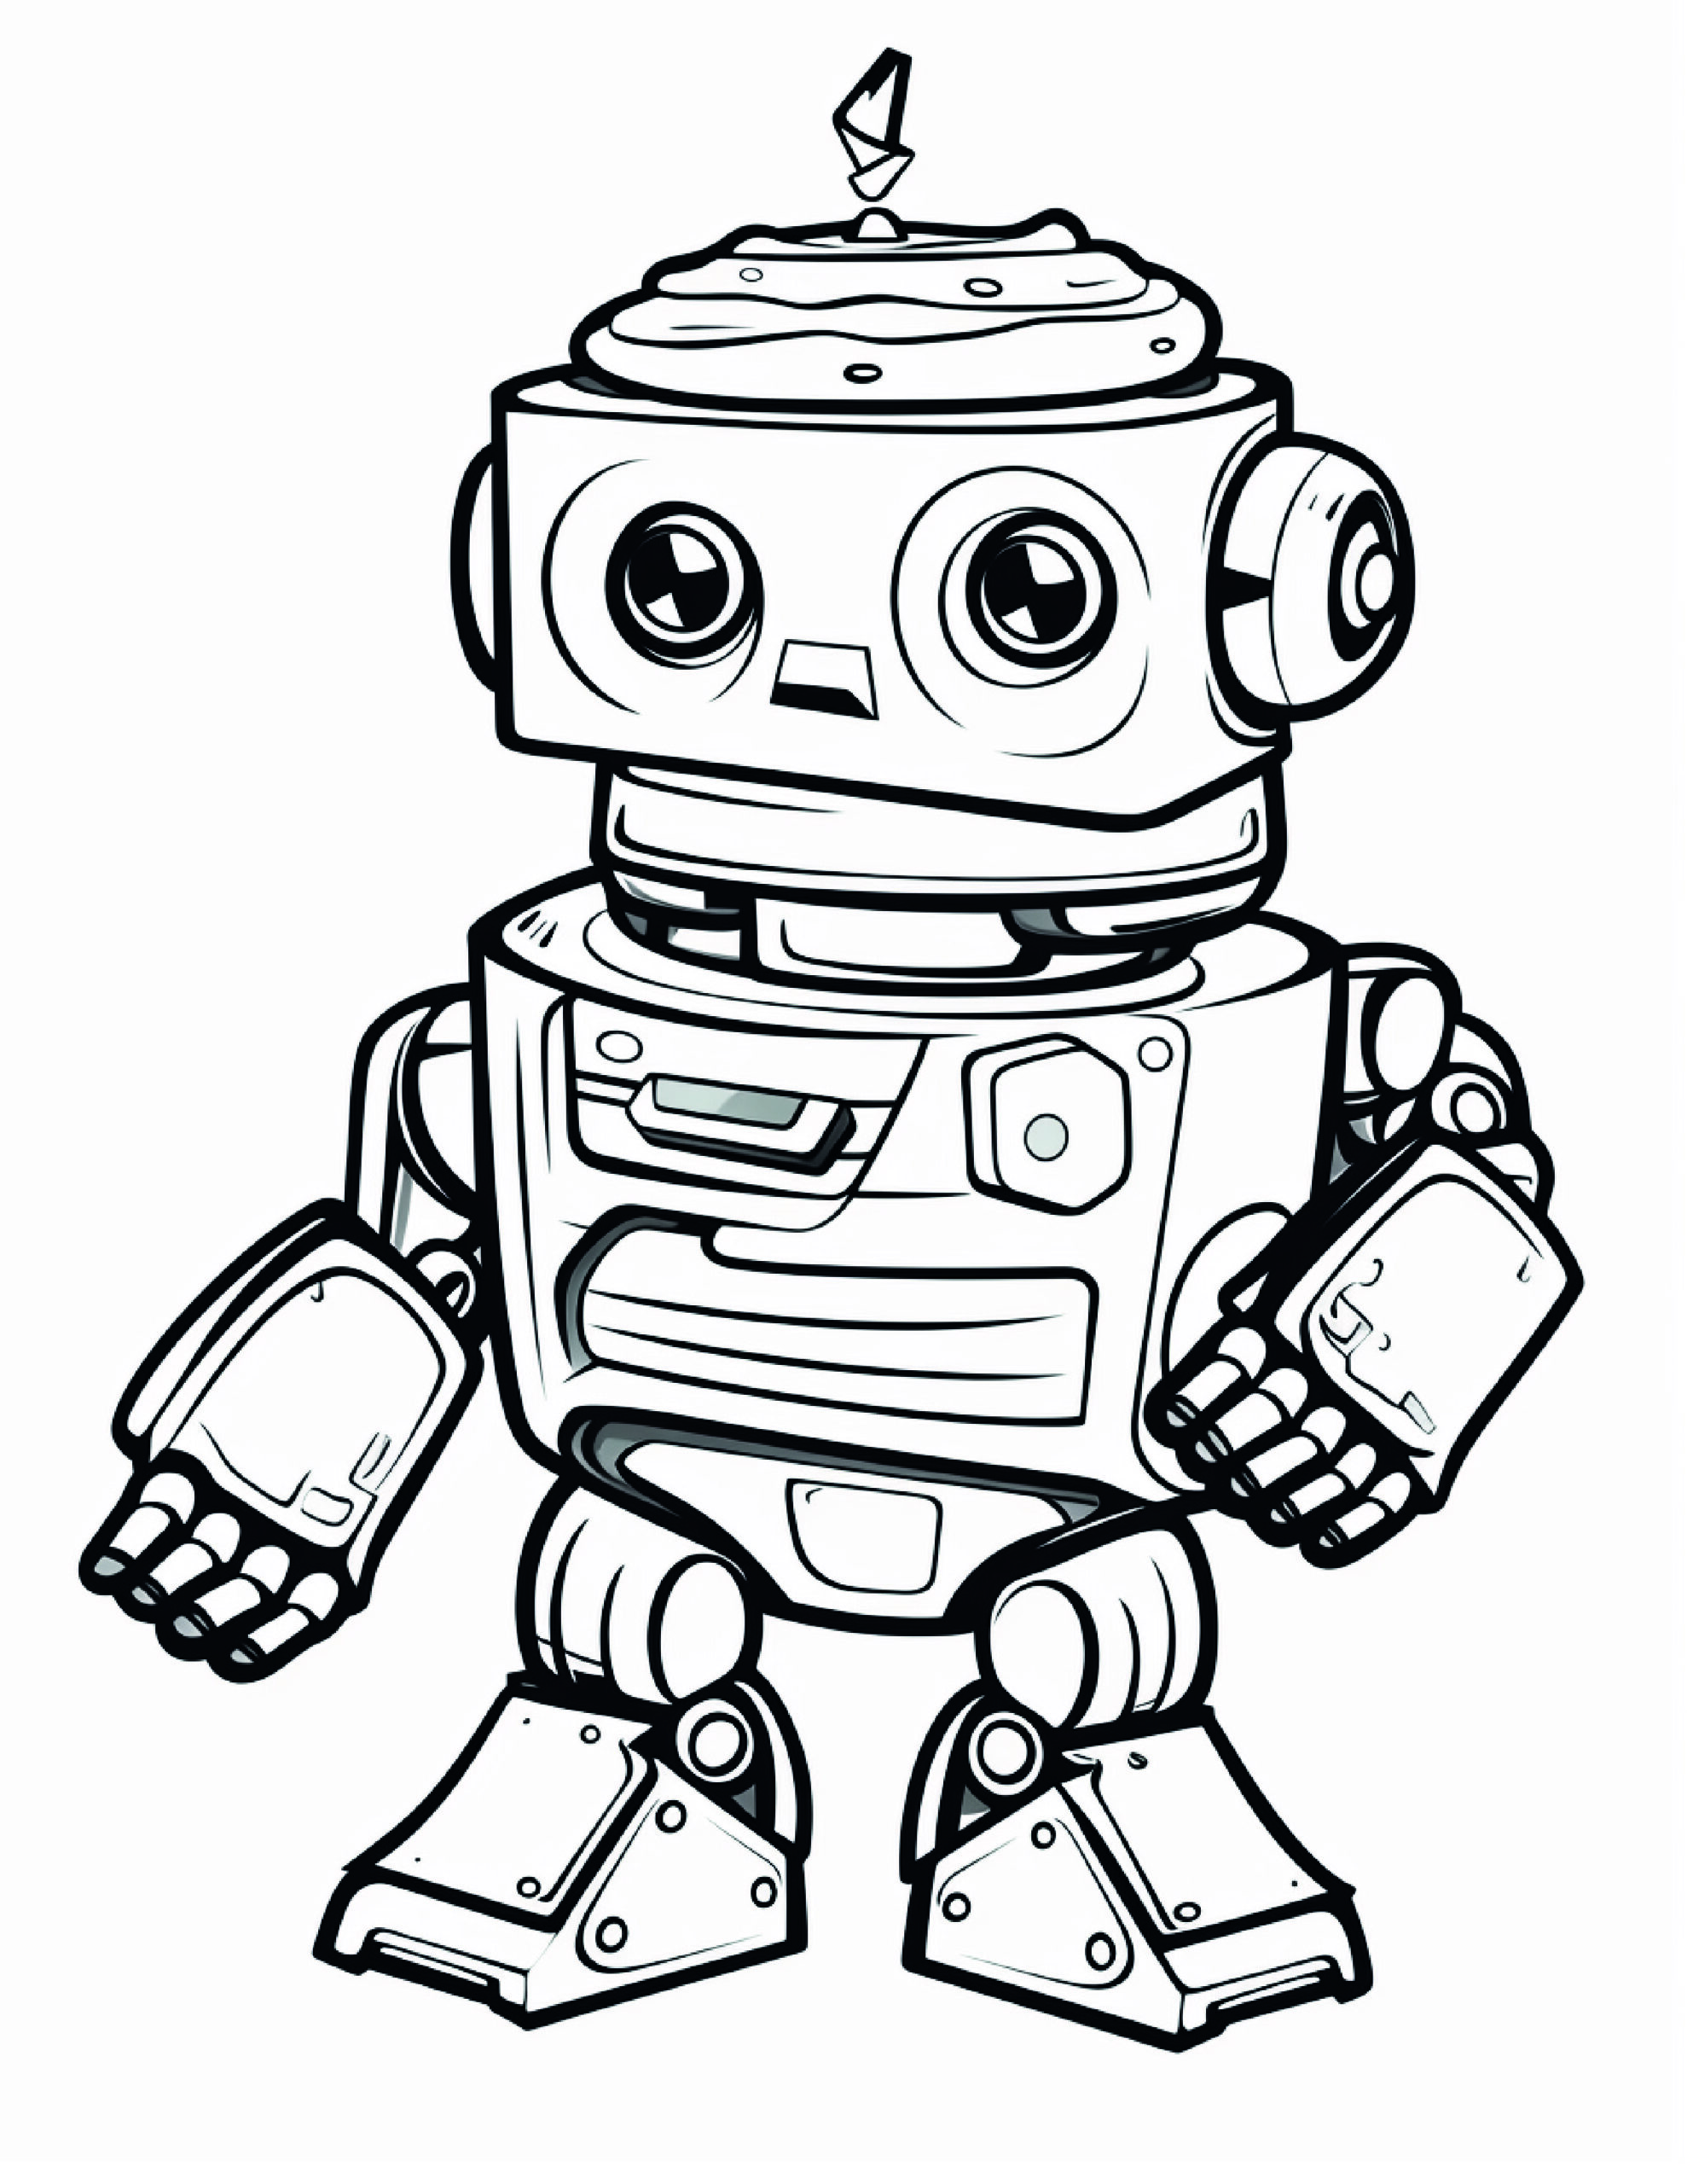 Robot Coloring Page 13 - A line drawing of a weird robot. 